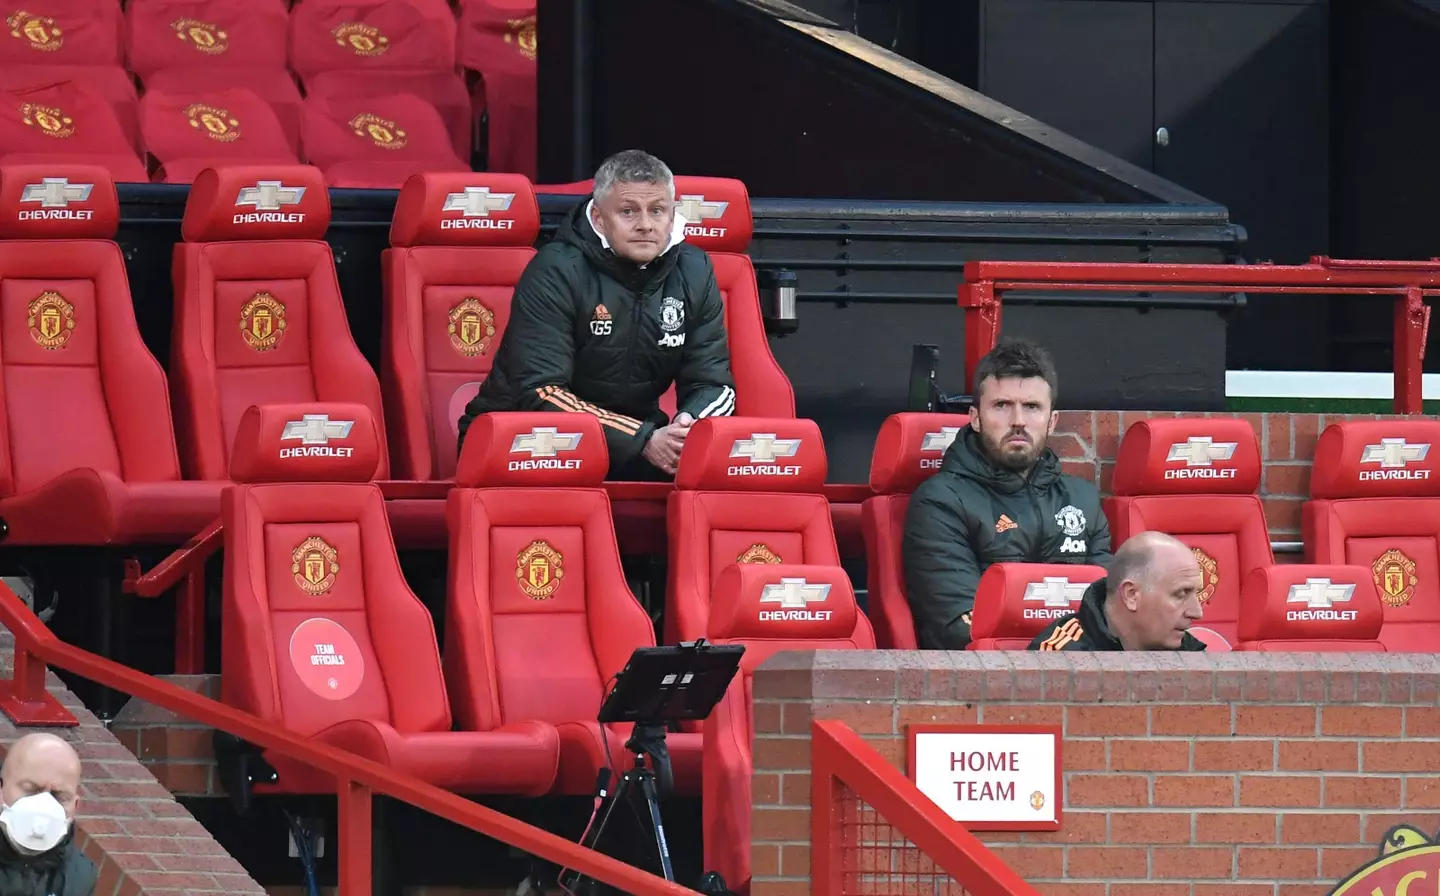 Former Manchester United manager Ole Gunnar Solskjaer in the dugout. (Image